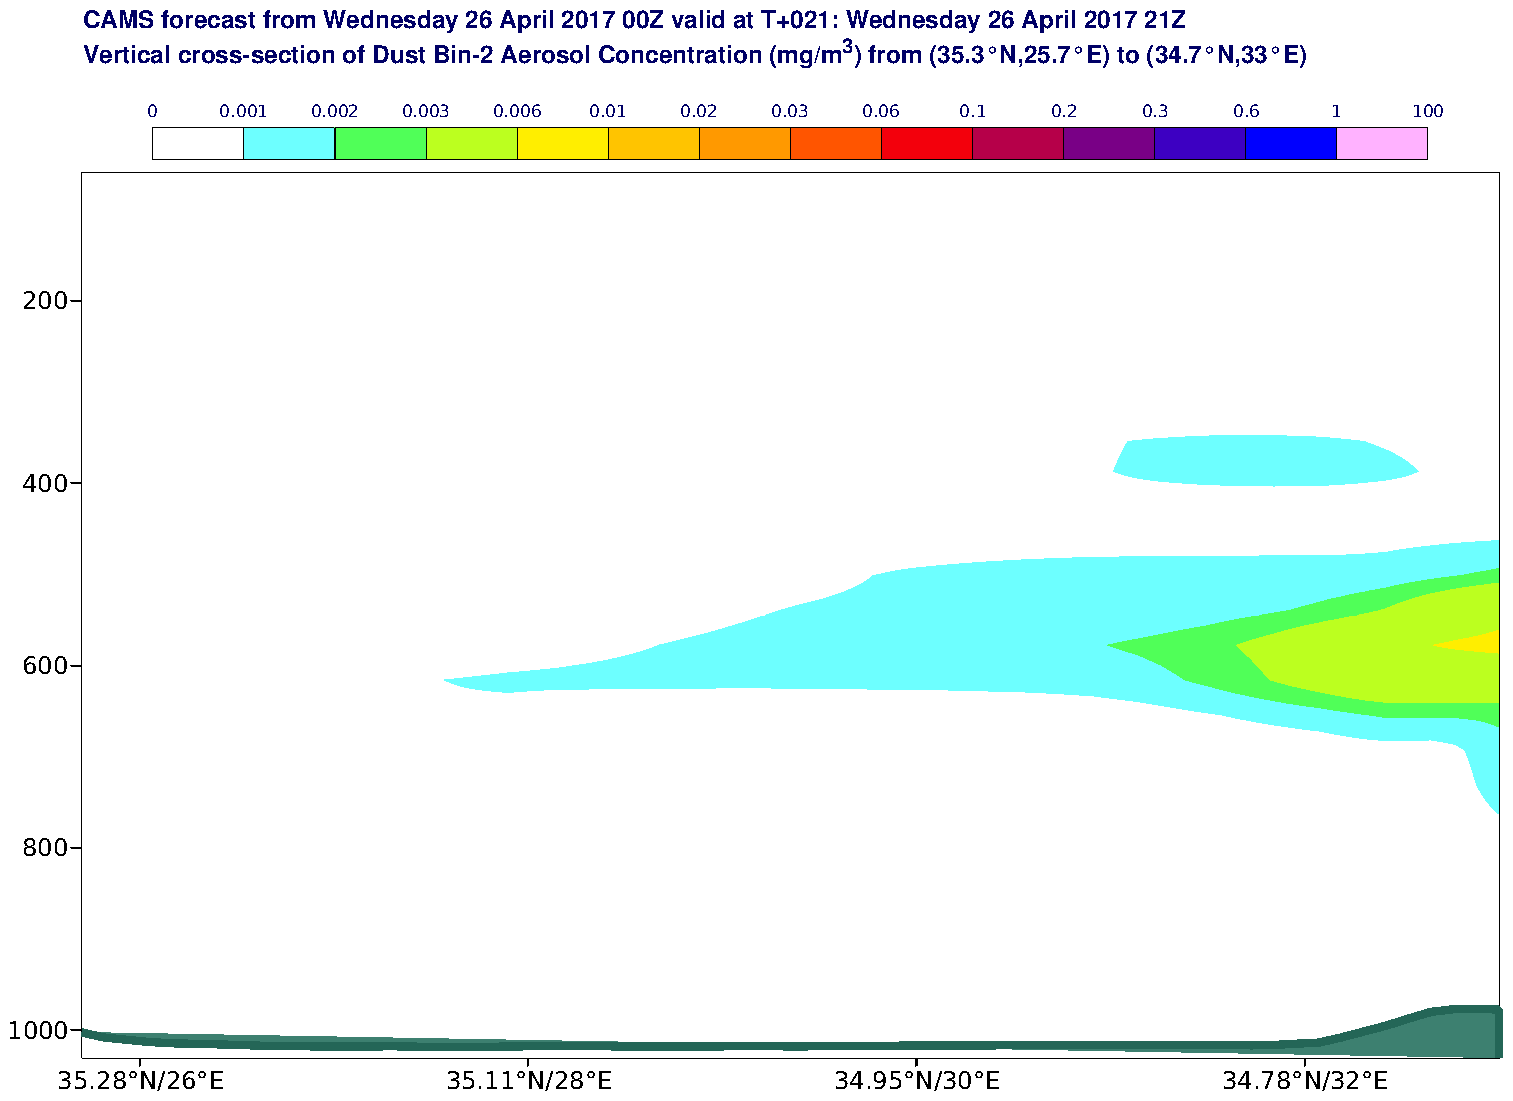 Vertical cross-section of Dust Bin-2 Aerosol Concentration (mg/m3) valid at T21 - 2017-04-26 21:00